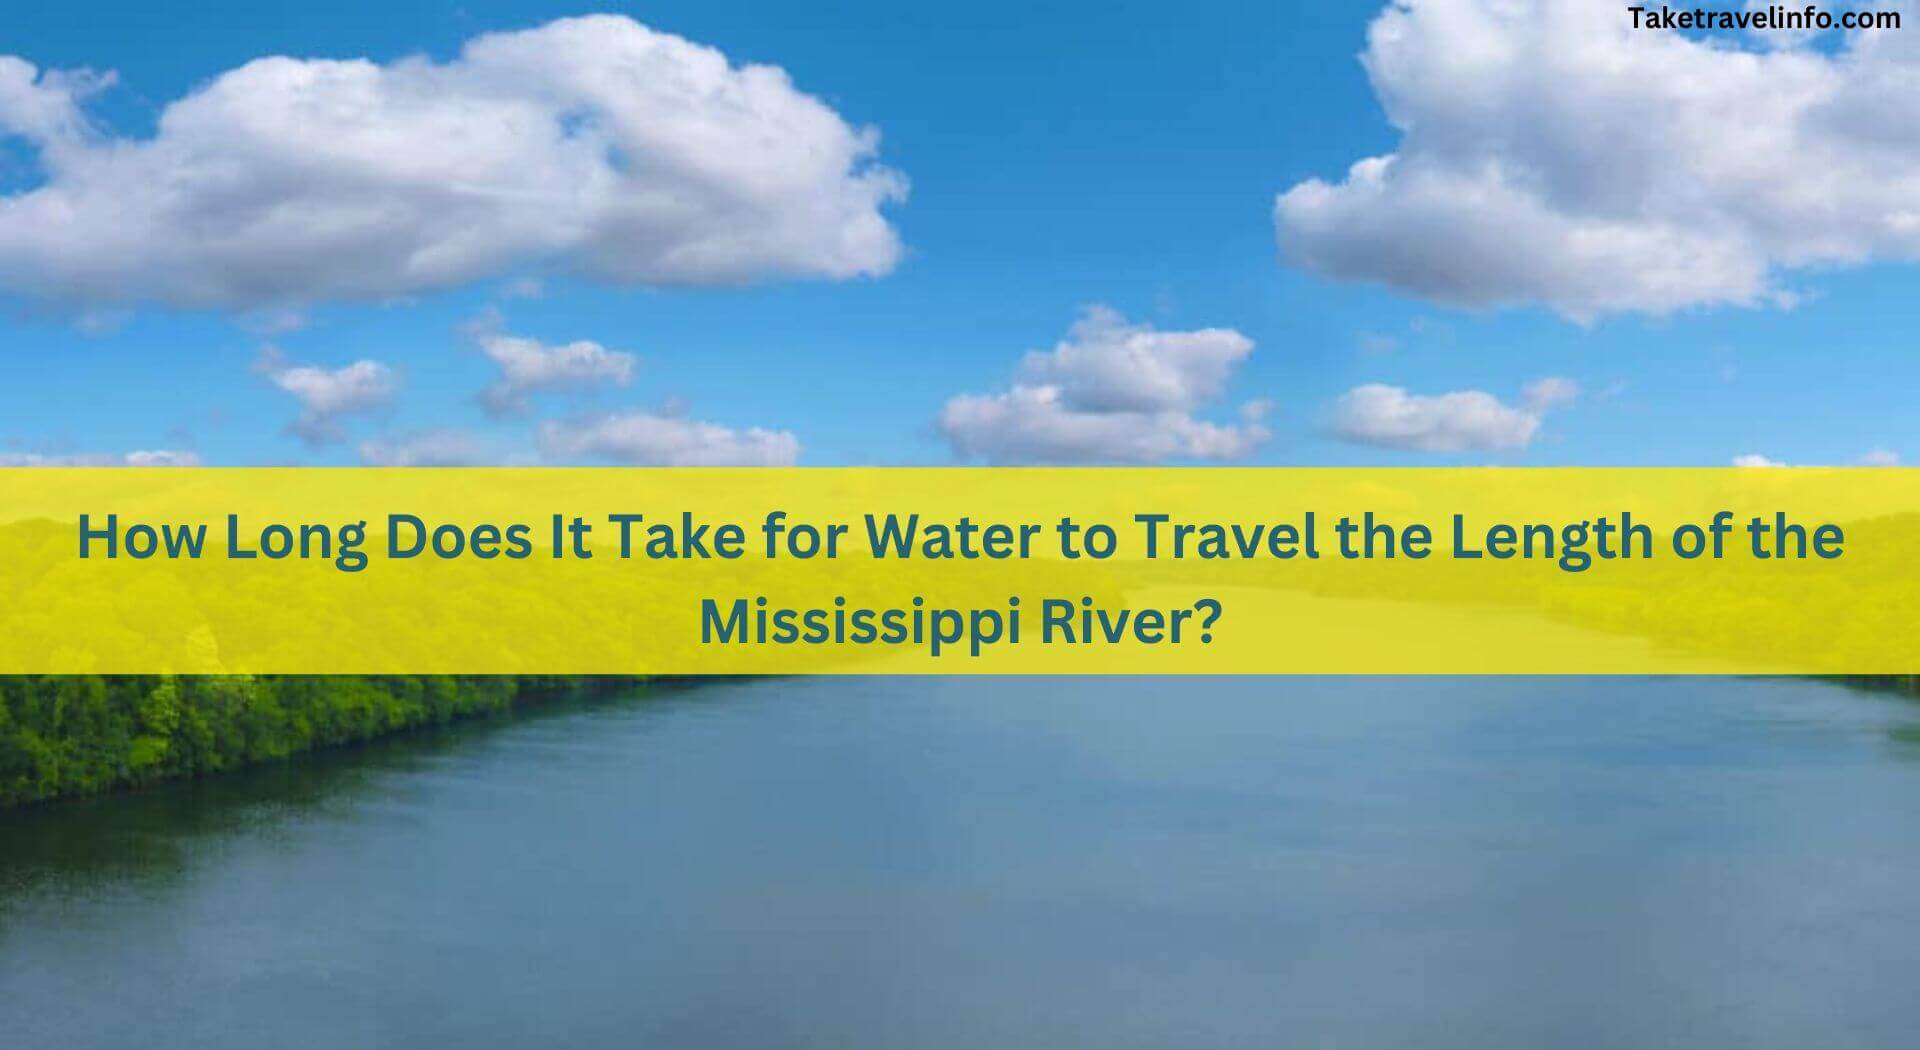 How Long Does It Take for Water to Travel the Length of the Mississippi River?